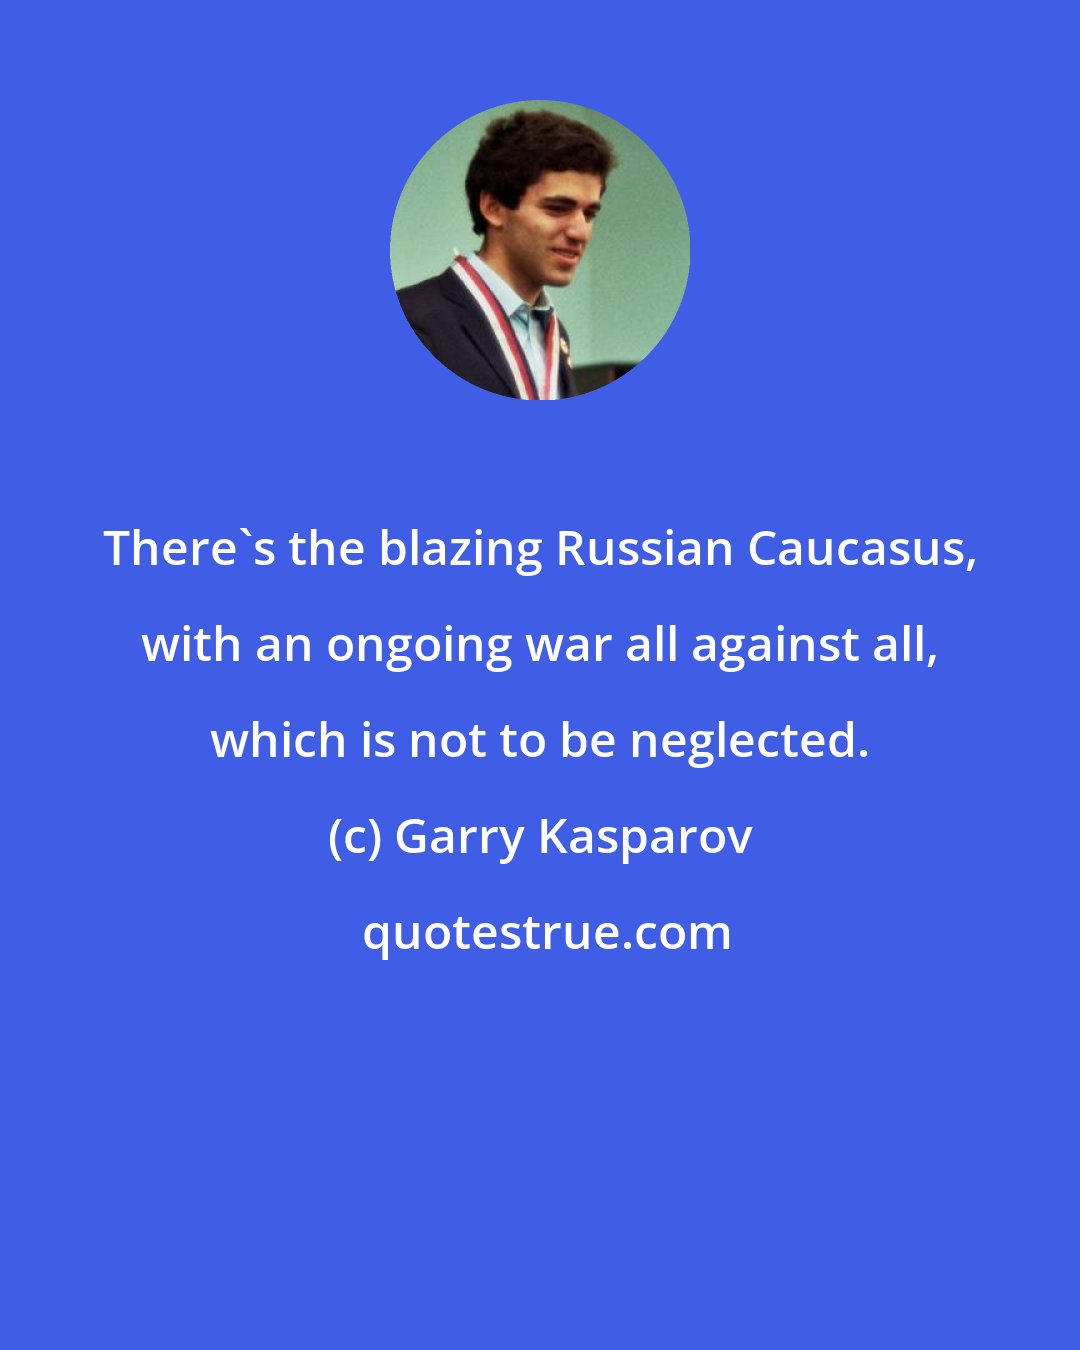 Garry Kasparov: There's the blazing Russian Caucasus, with an ongoing war all against all, which is not to be neglected.